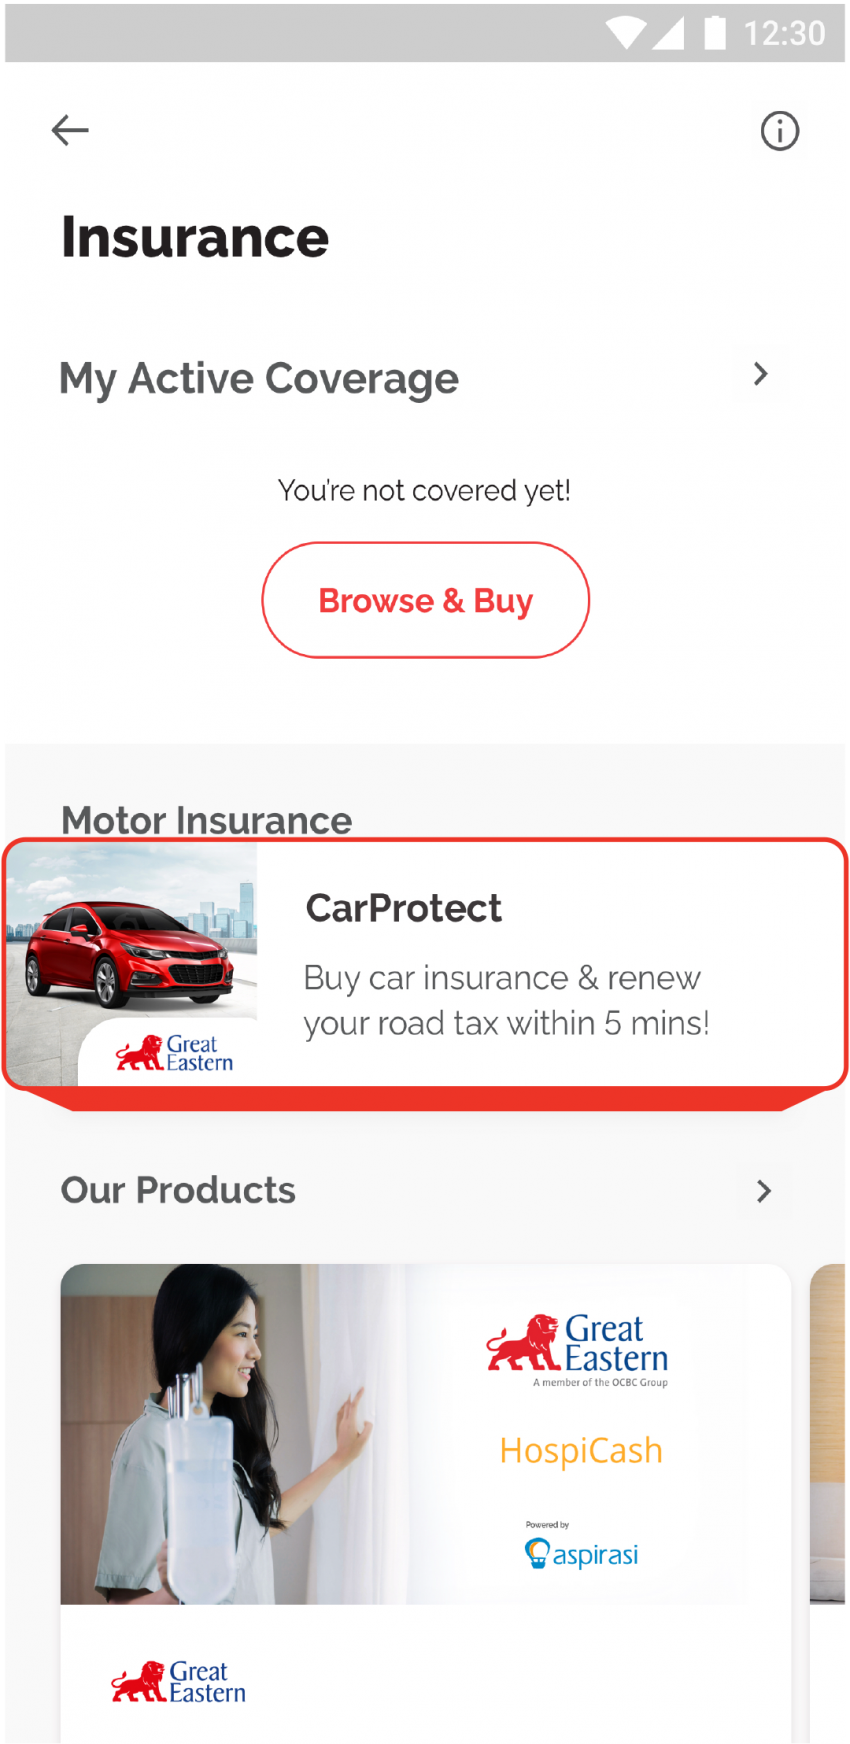 AD: Interstate travel is now back! Before you set off, insure your car with CarProtect via the Boost app 1359905